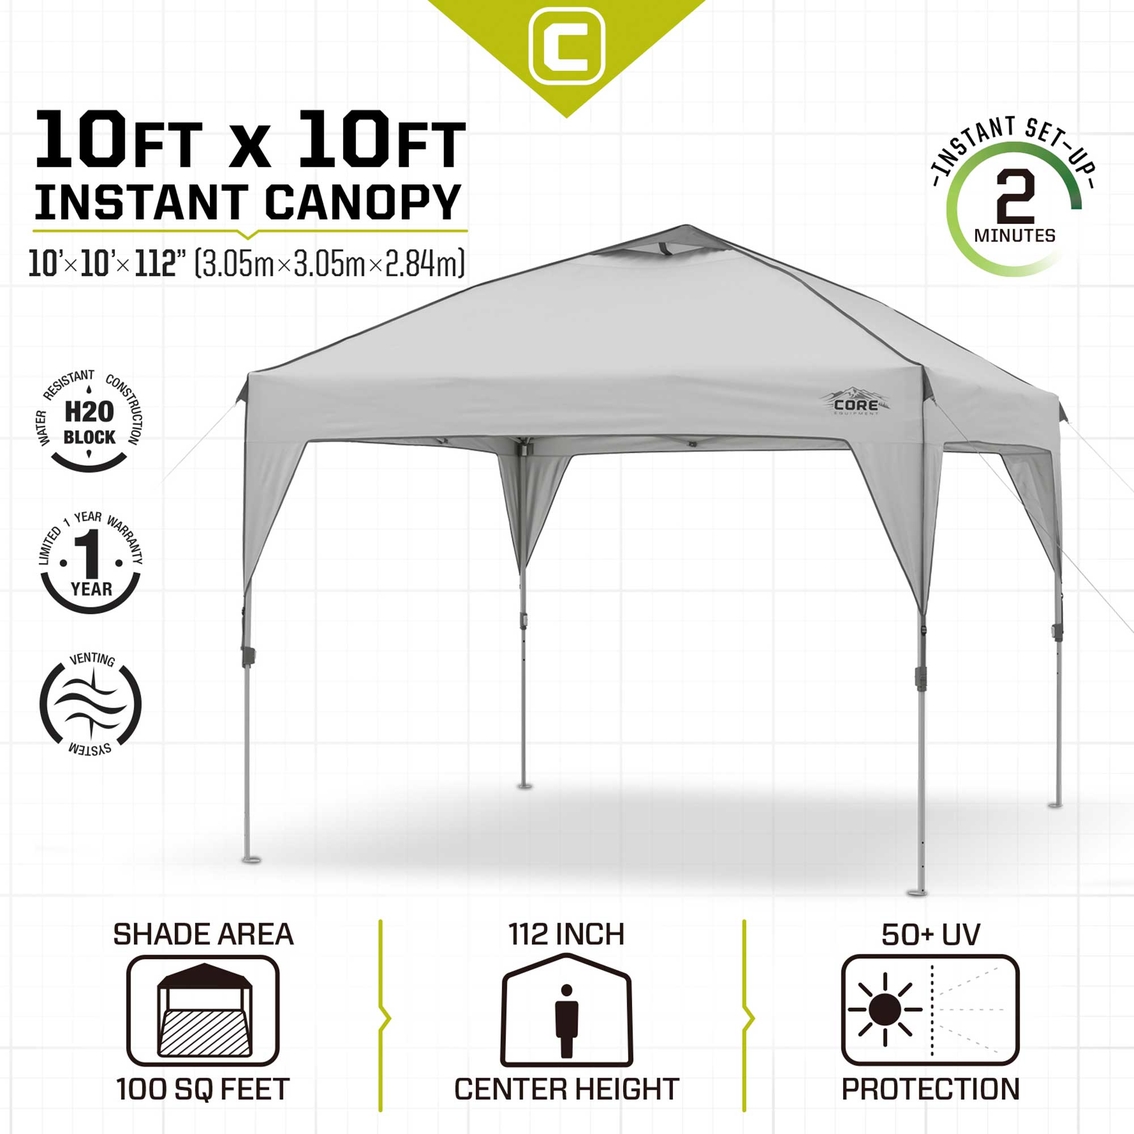 Core Equipment 10 x 10 ft. Instant Canopy - Image 2 of 7